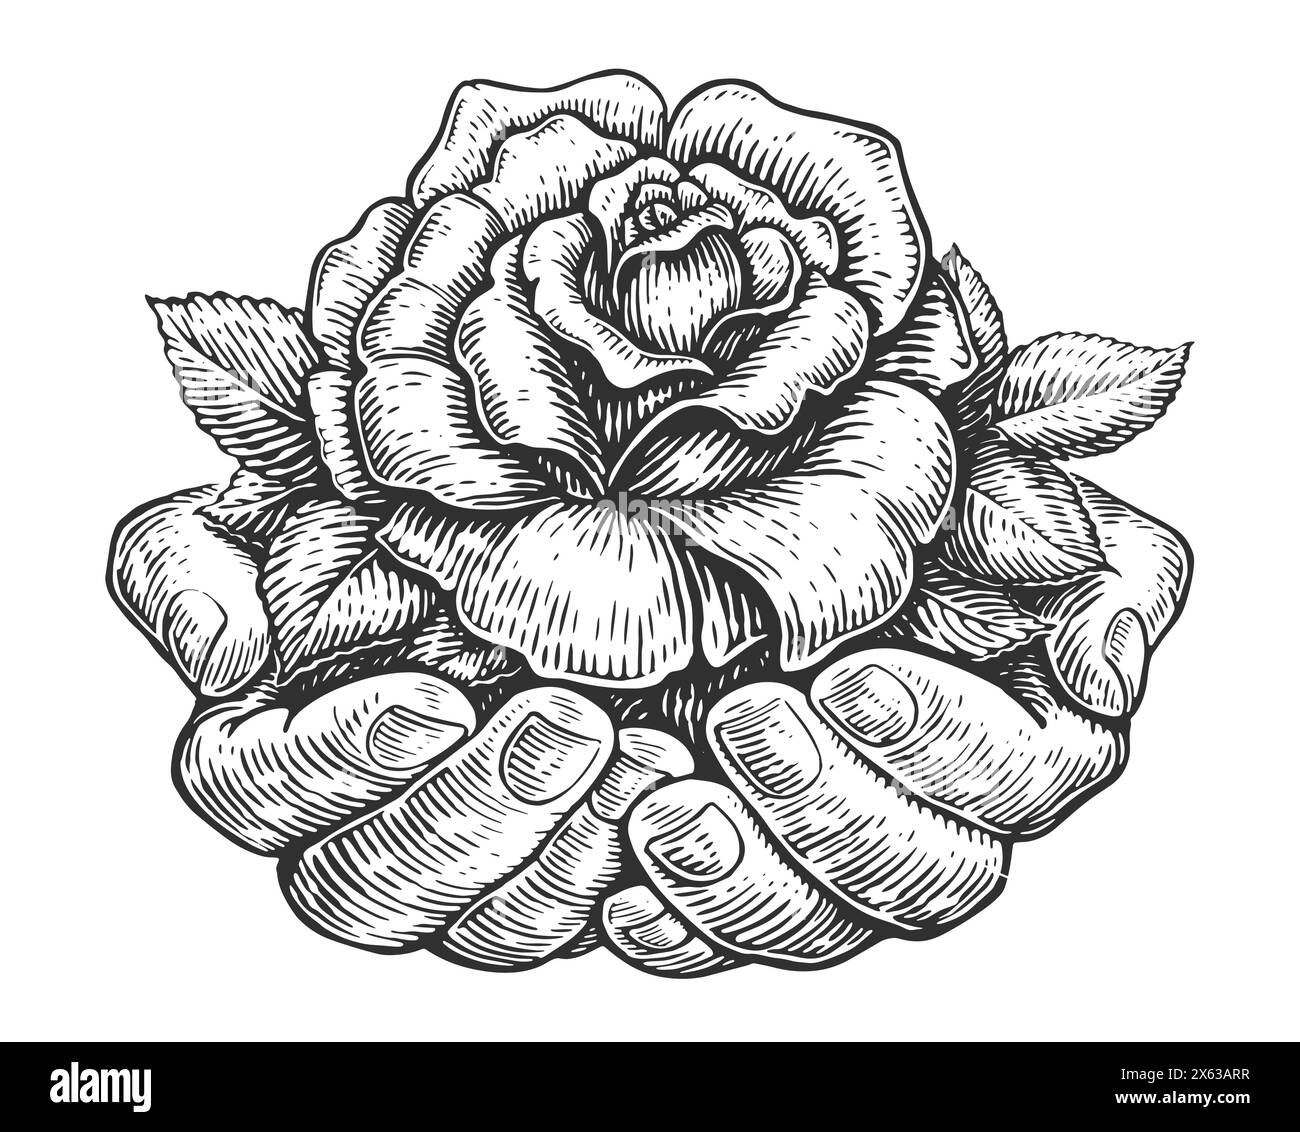 Hands palms holding flower. Rose bud with leaves in hand. Hand drawn sketch vintage vector illustration Stock Vector